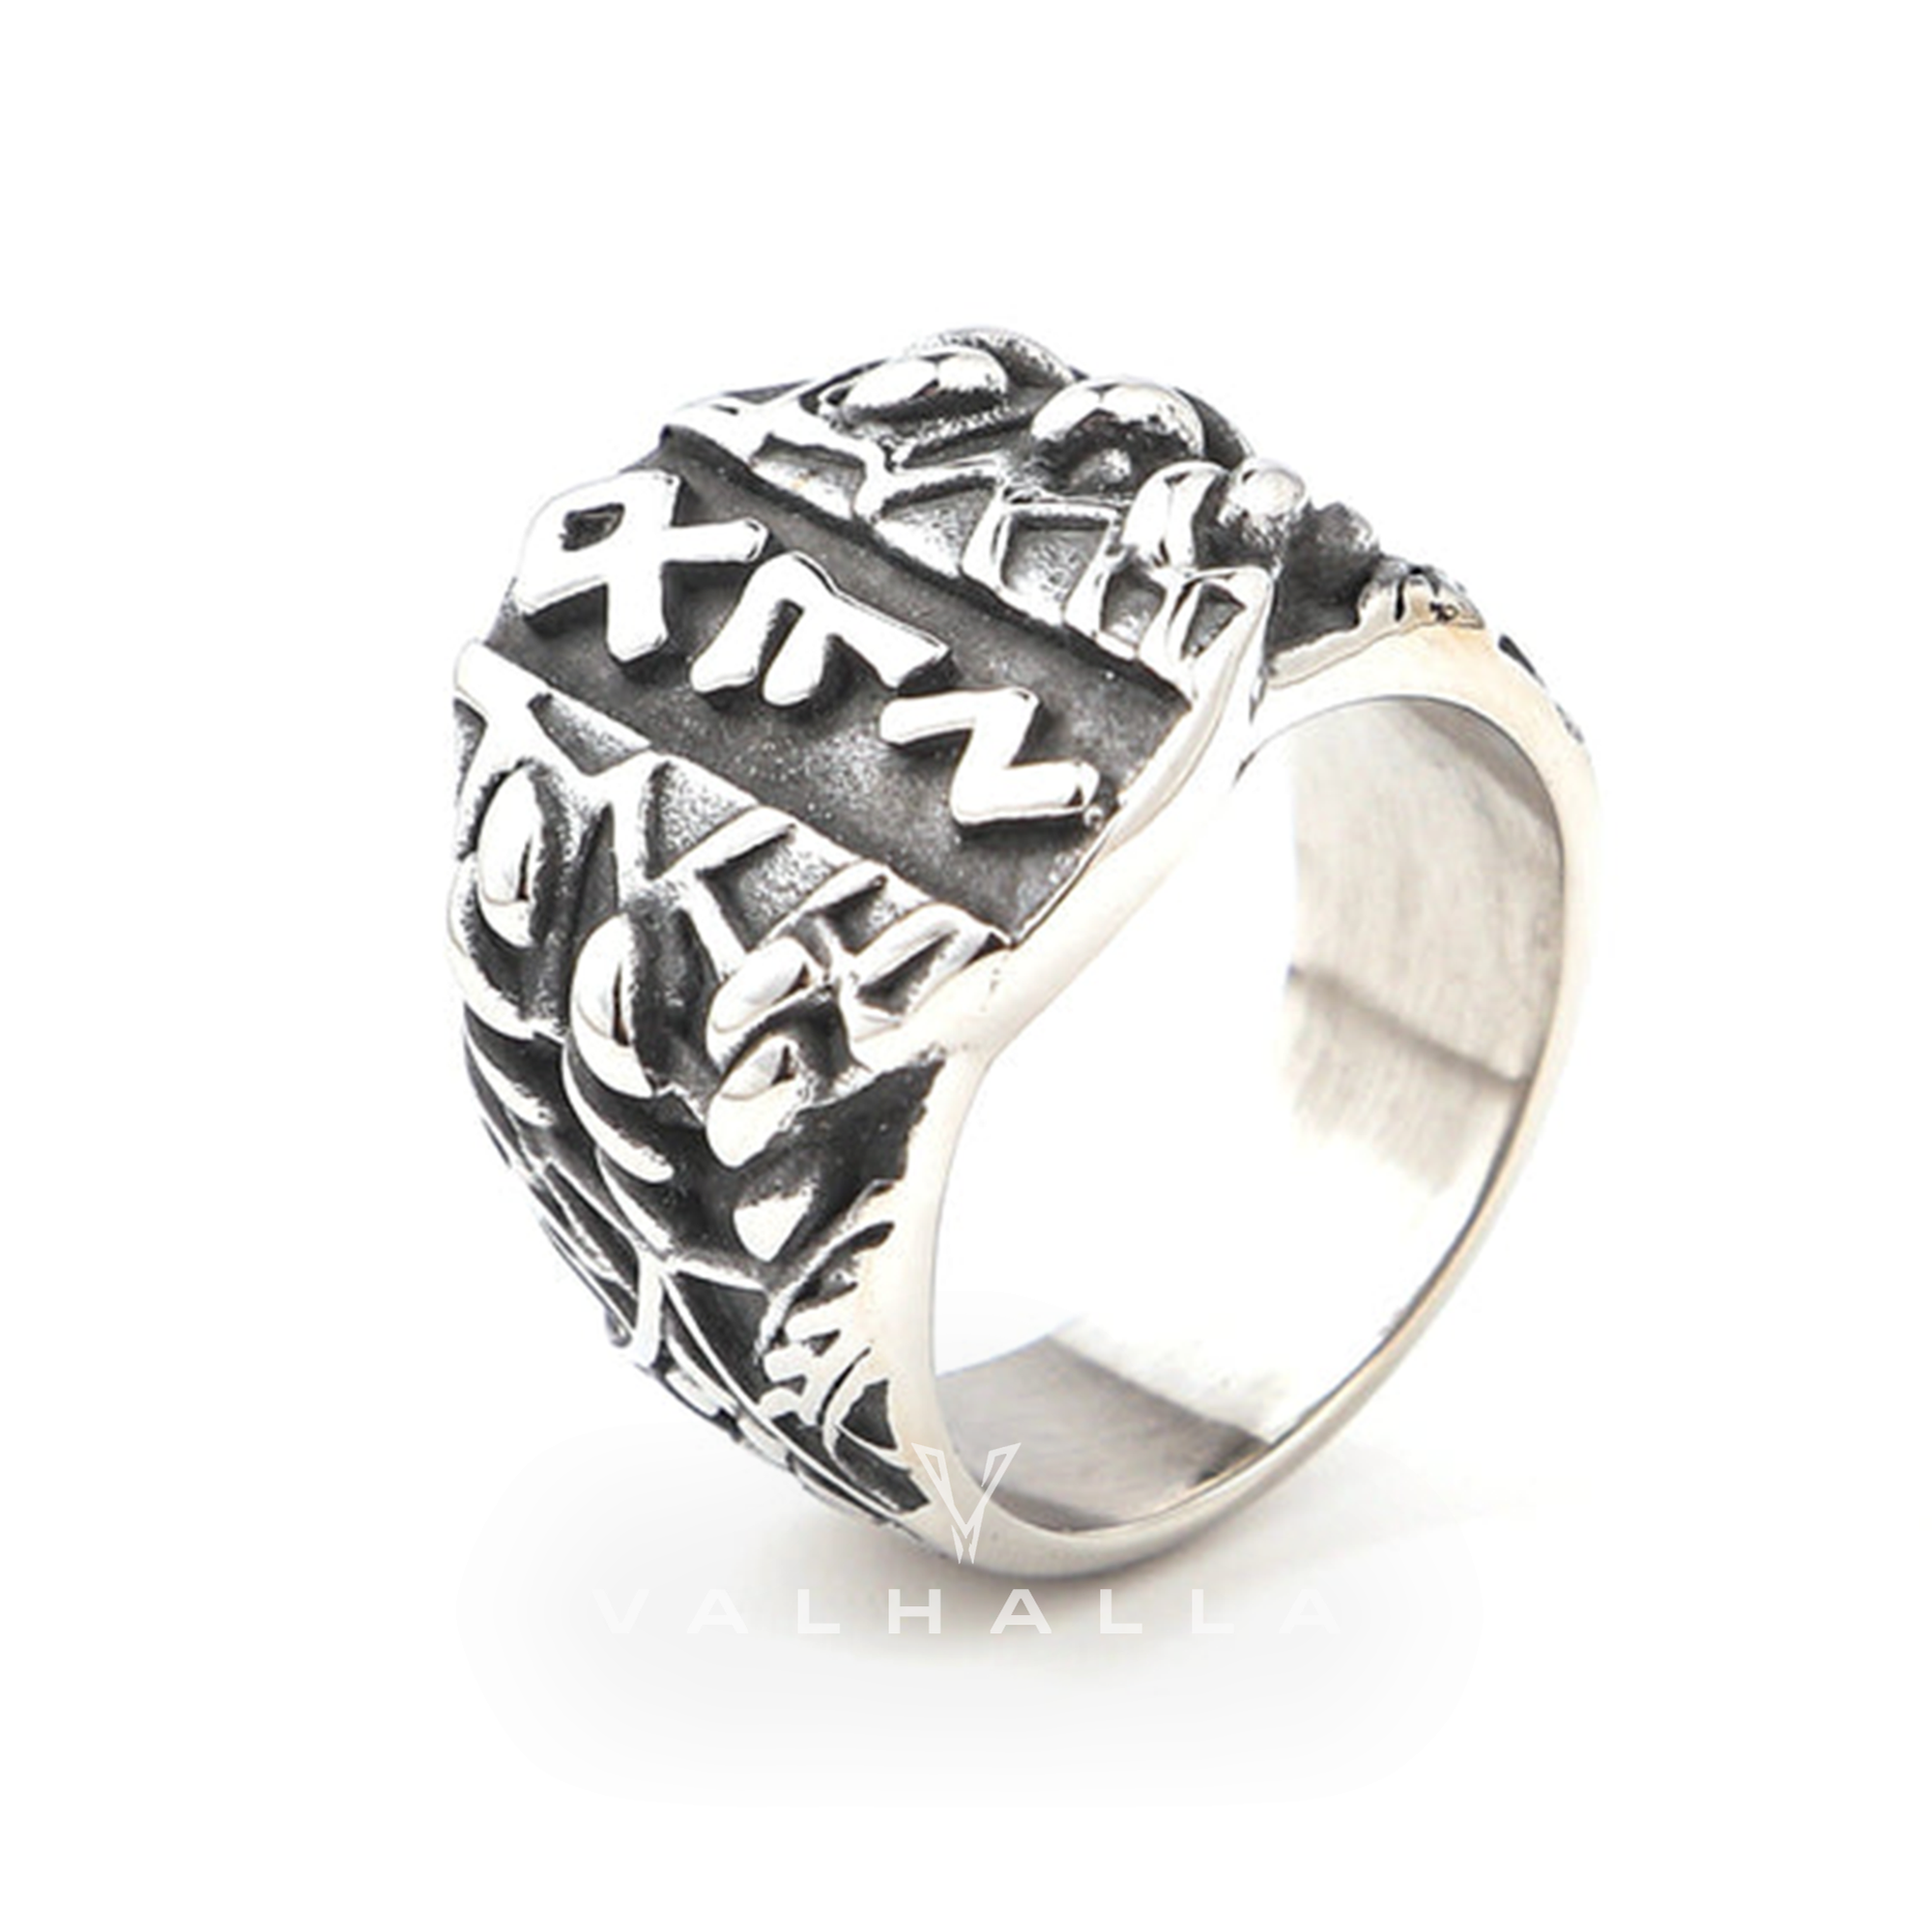 Handcrafted Stainless Steel Triple Rune Ring